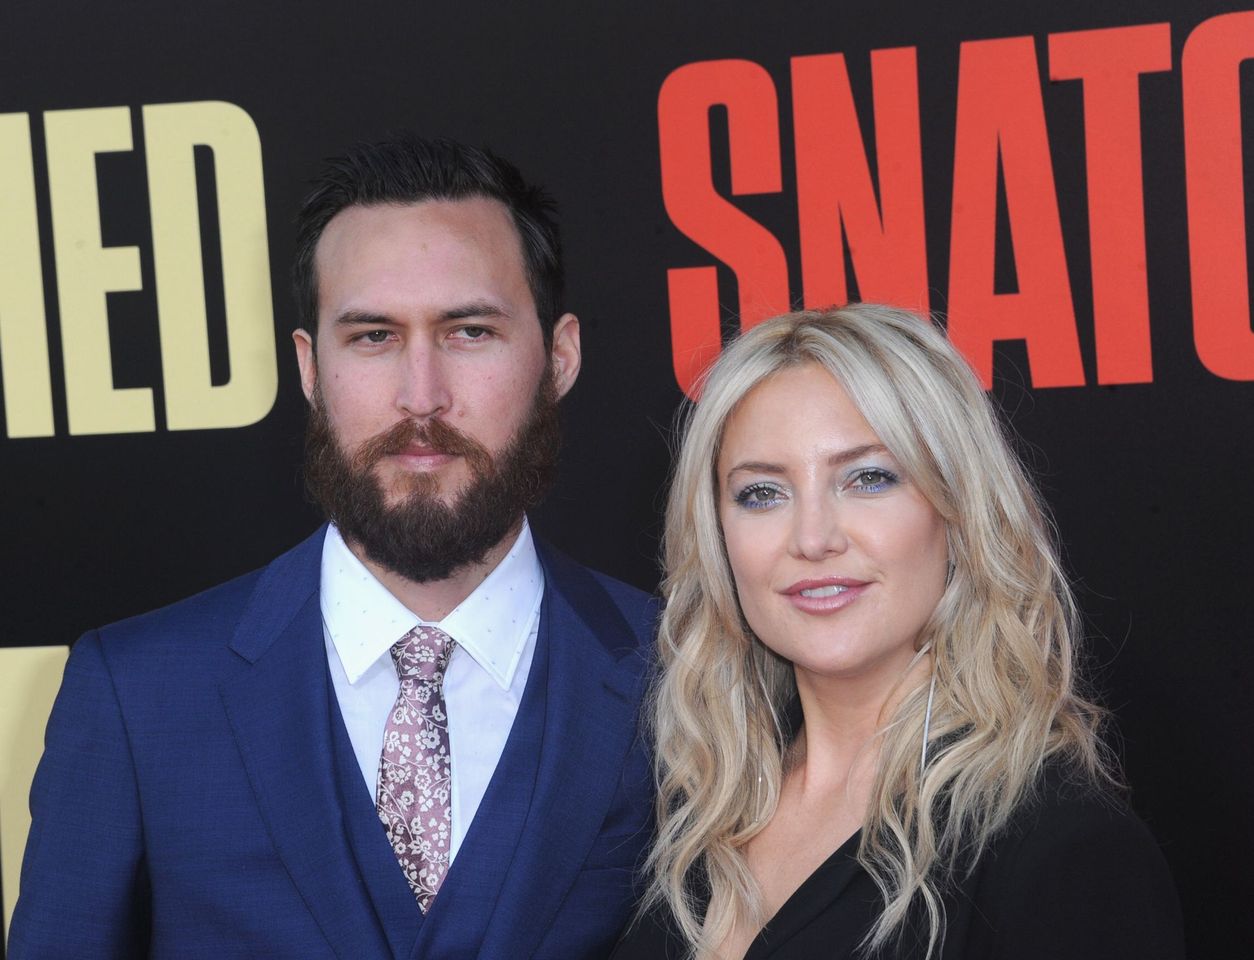 Danny Fujikawa and Kate Hudson during the premiere of "Snatched" on May 10, 2017, in Westwood, California. | Source: Getty Images.